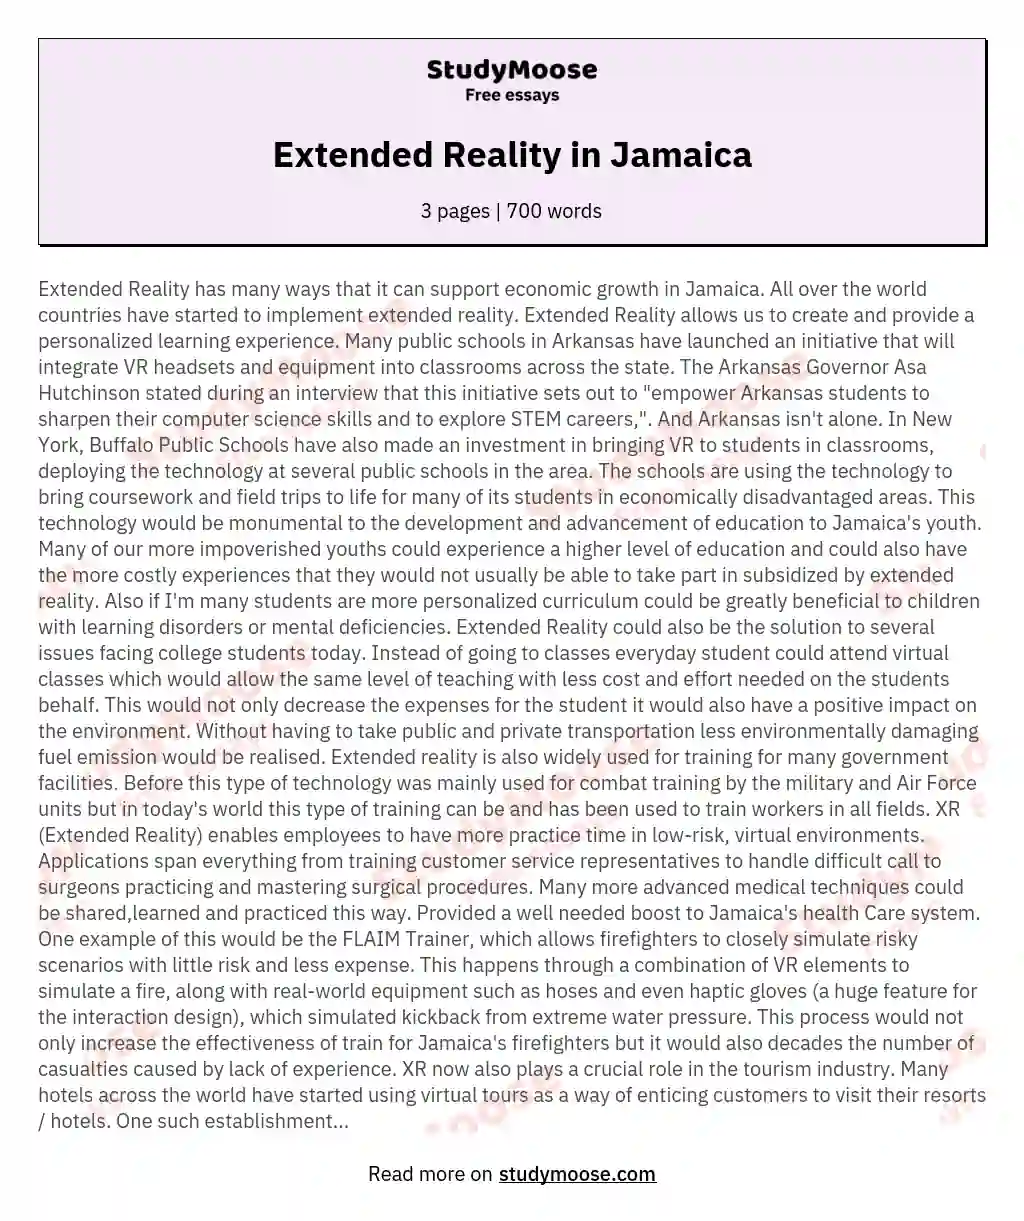 Extended Reality in Jamaica essay